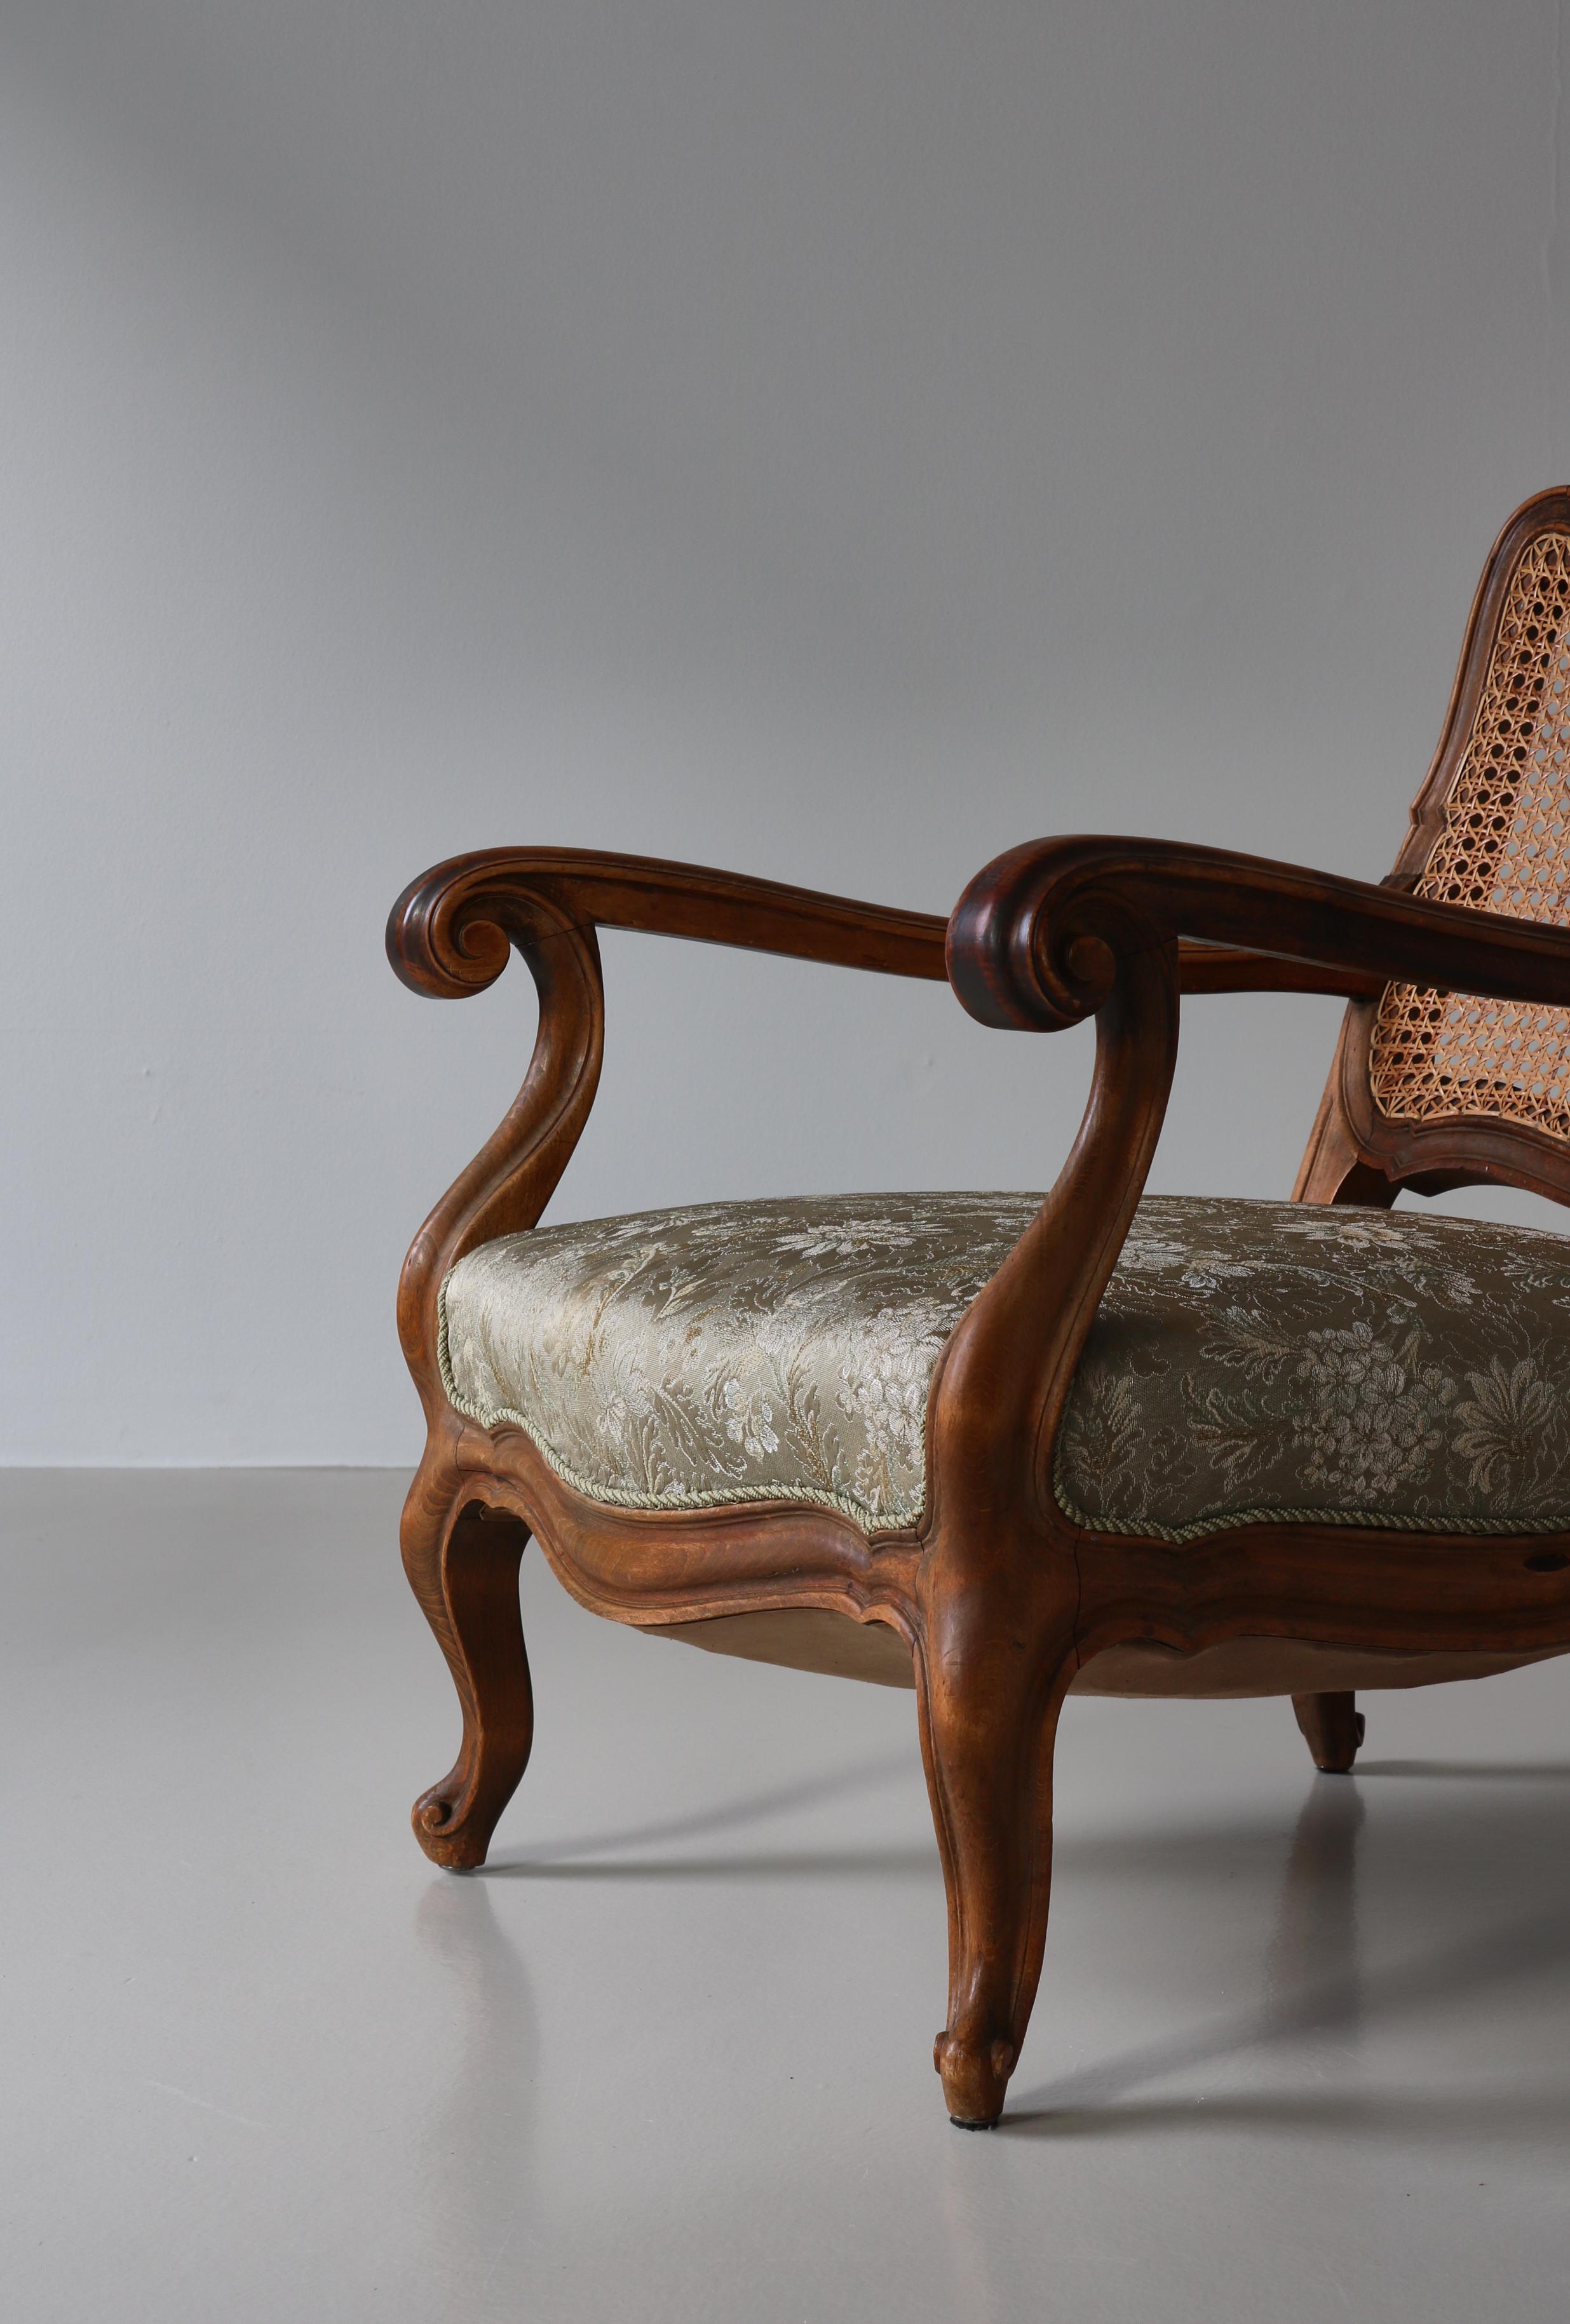 Bergére Chair Rococo Revival by Danish Cabinetmaker, Early 20th Century For Sale 5